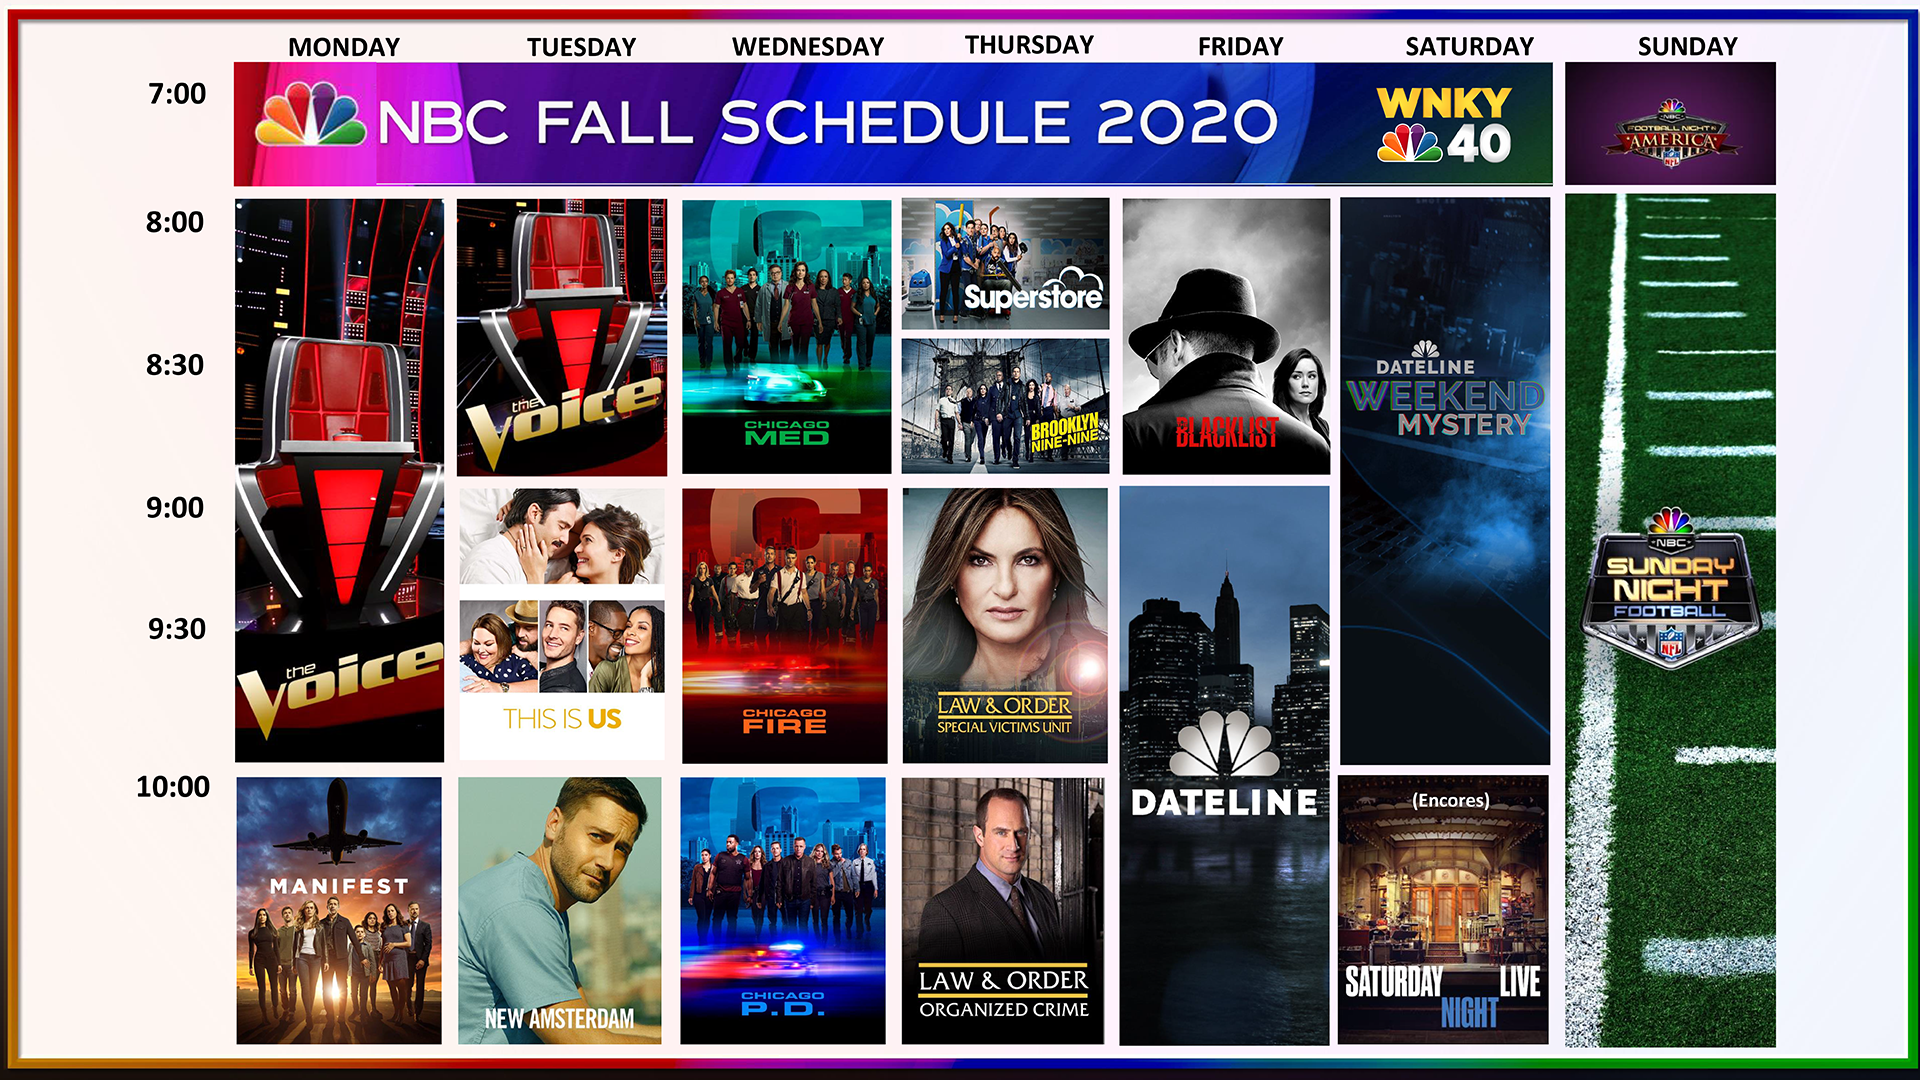 Nbc Fall Schedule 2022 23 Nbc Enters The 2020-21 Season With Unprecedented Stability Across Its  Schedule - News 40 | Wnky Television